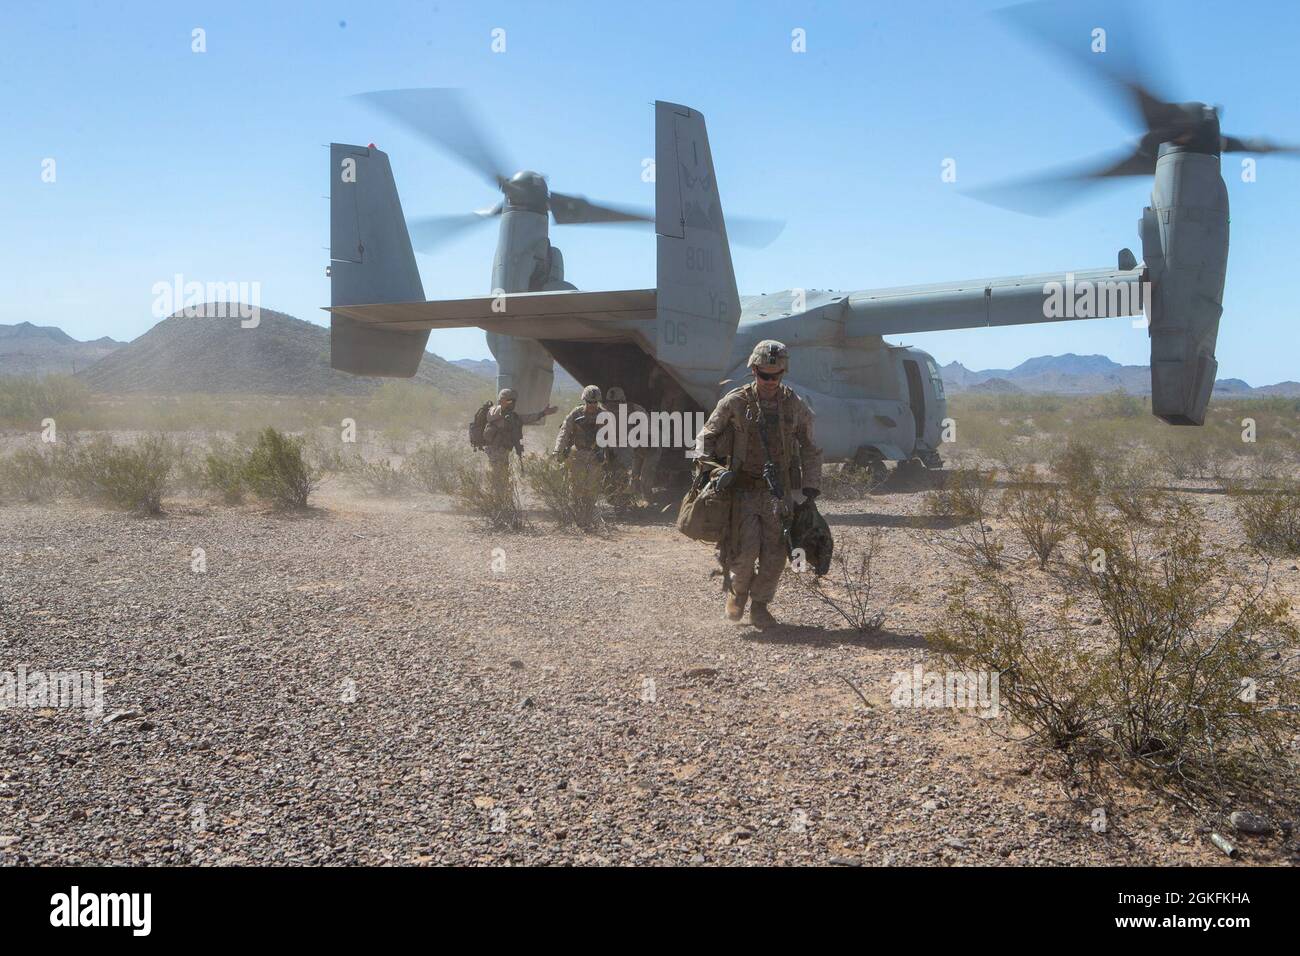 A U.S. Marine with Echo Company, 2nd Battalion, 4th Marine Regiment, 1st Marine Division, disembarks an MV-22B Osprey, assigned to Marine Aviation Weapons and Tactics Squadron One (MAWTS-1), during Weapons and Tactics Instructor (WTI) course 2-21, at Landing Zone Mallard, in Luke Air Force Range, Ariz., April 9, 2021. The WTI course is a seven-week training event hosted by MAWTS-1, providing standardized advanced tactical training certification of unit instructors qualifications to support Marine aviation training and readiness, and assists in developing and employing aviation weapons and tact Stock Photo